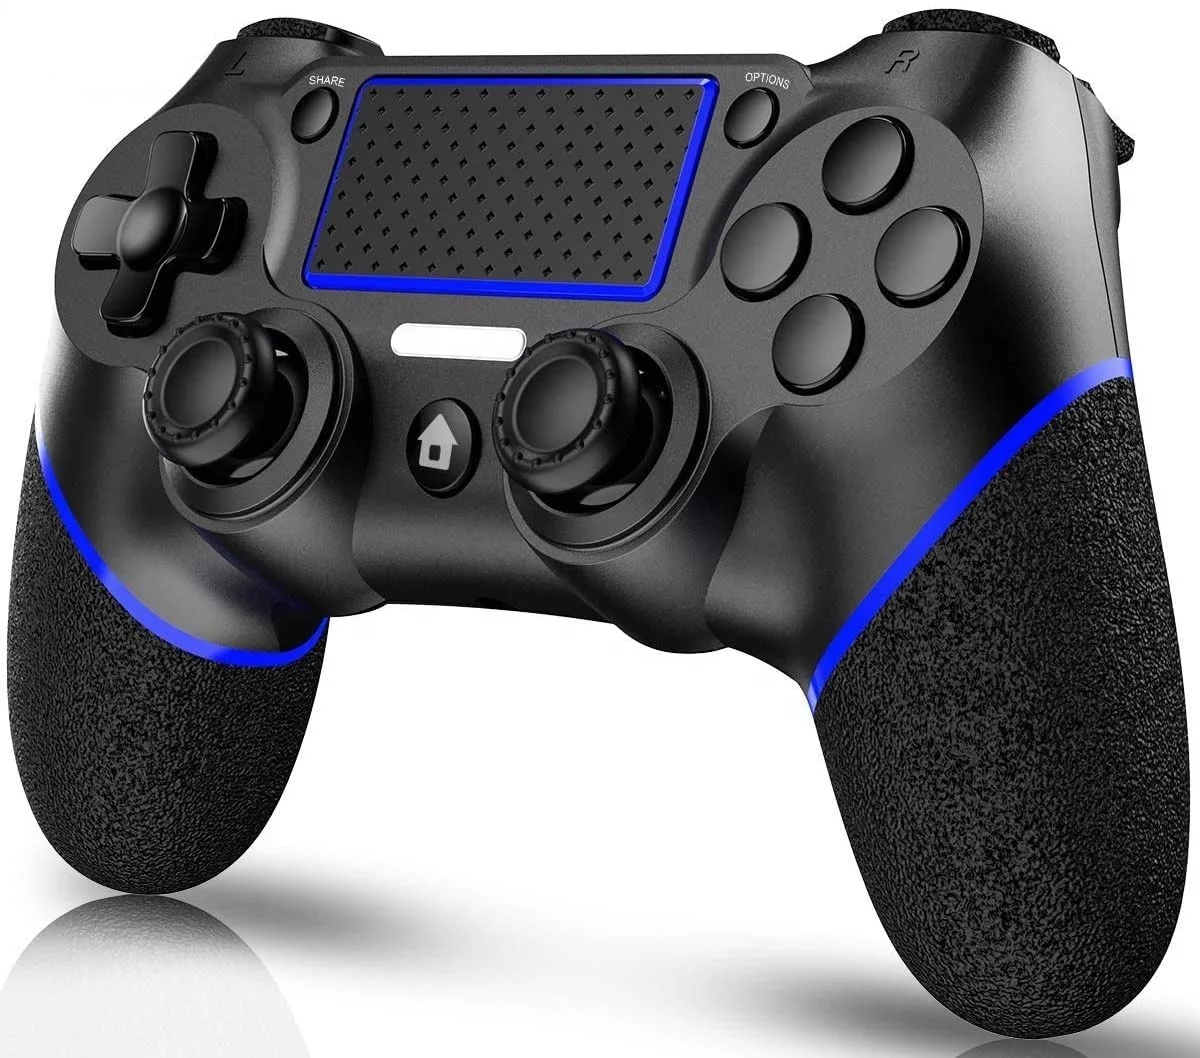 Uitleg cocaïne regering Ps4 Controller Wireless Blue Tooth Pc Ps4 Gamepad For Dualshock 4 Ps4  Joystick Game Controller For Playstation 4 Controller - Buy Ps4 Controller, Ps4 Joystick,Ps4 Joystick Game Controller Product on Alibaba.com